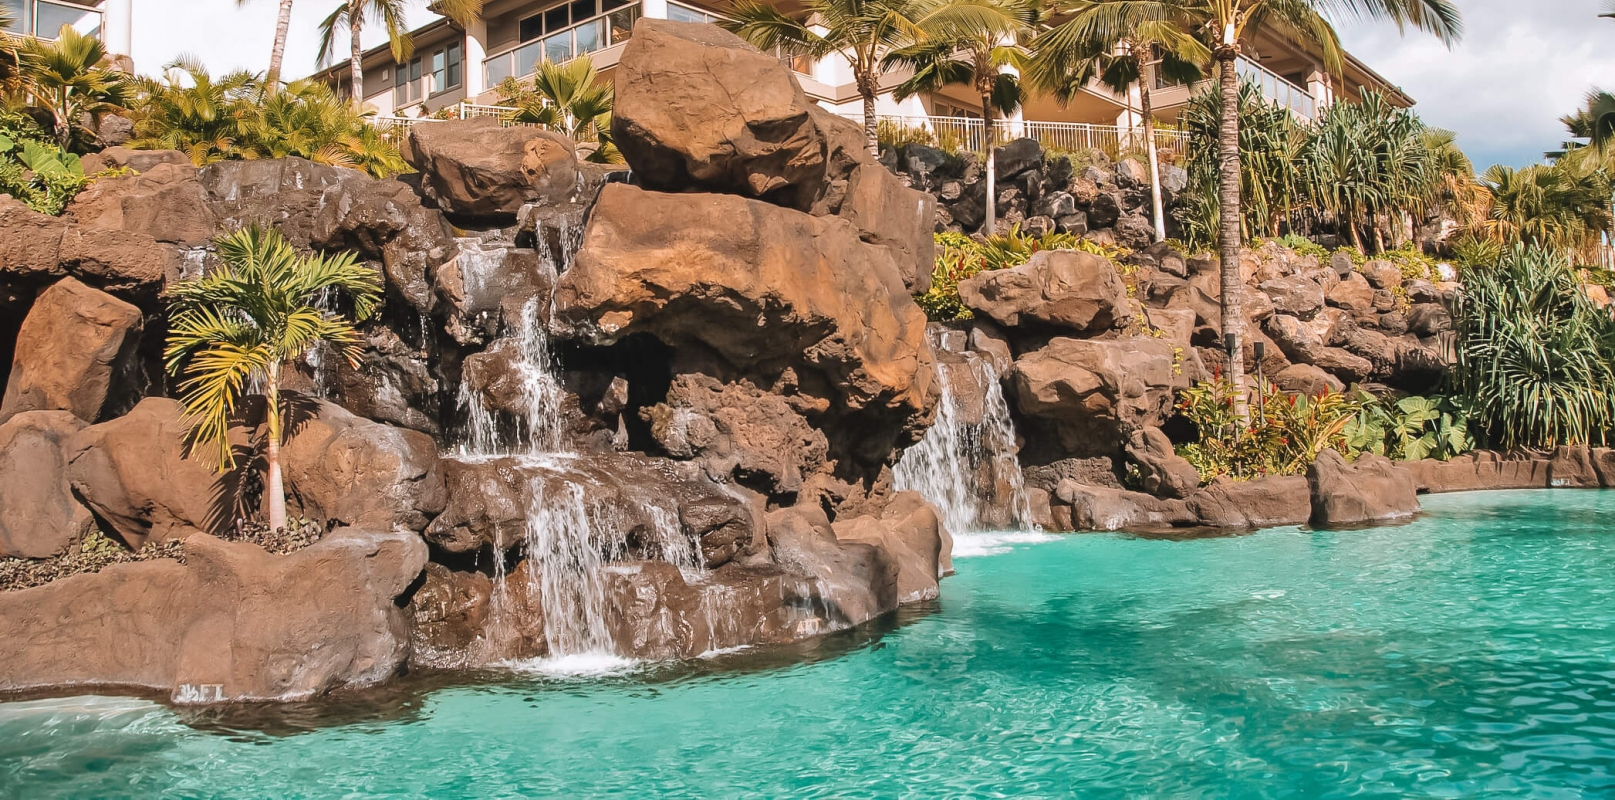 a rock wall with waterfalls drop into a pool in the foreground